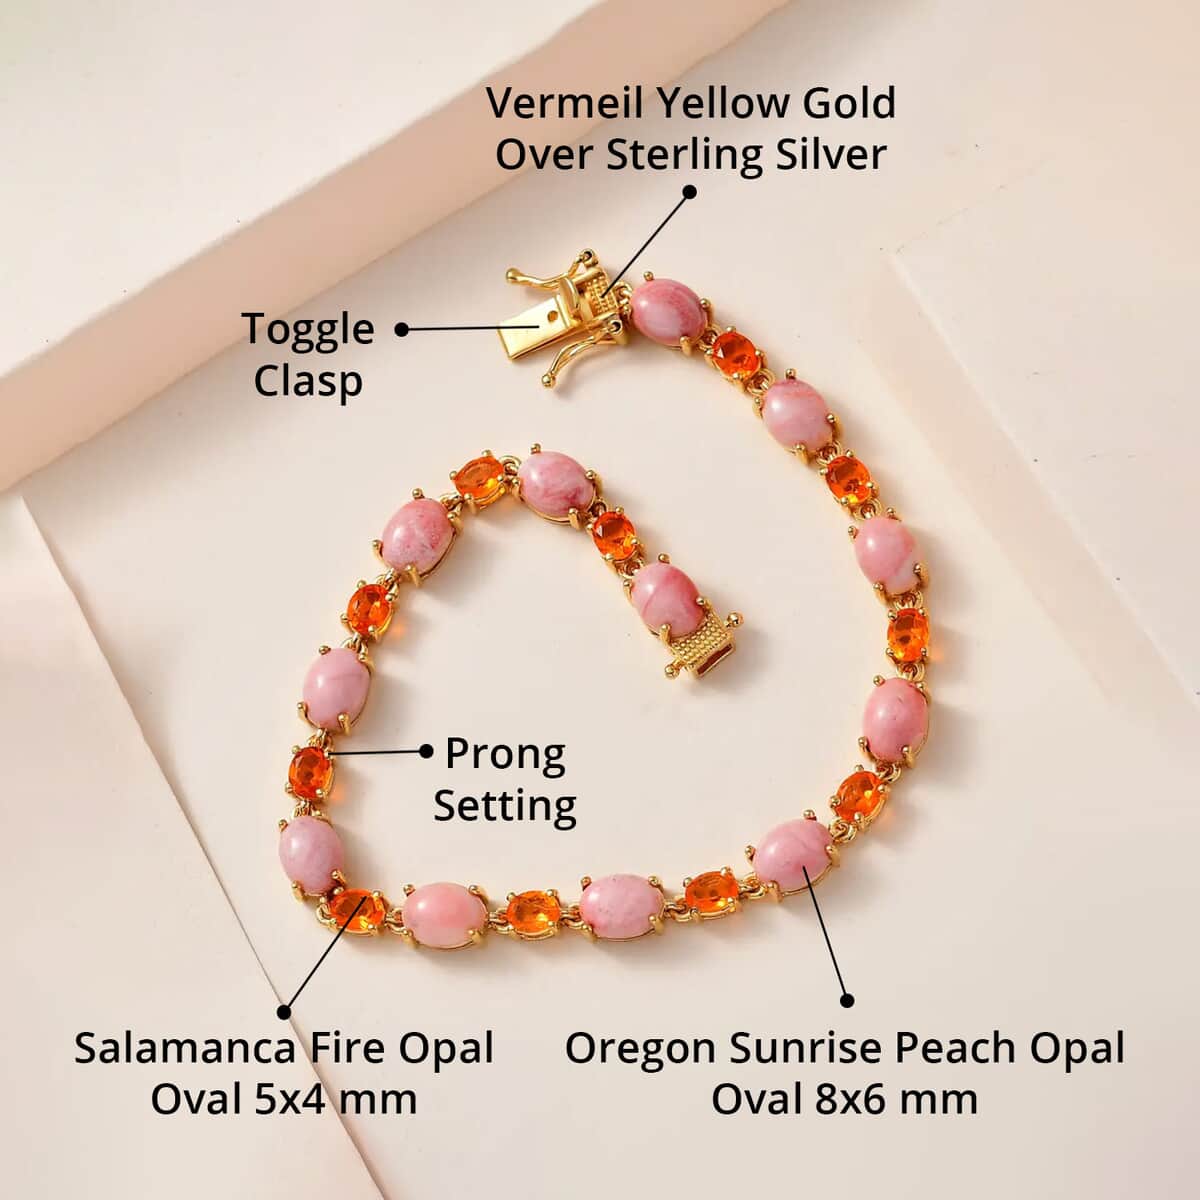 Premium Oregon Sunrise Peach Opal and Salamanca Fire Opal 15.40 ctw Bracelet in Vermeil Yellow Gold Over Sterling Silver (7.25 In) image number 4